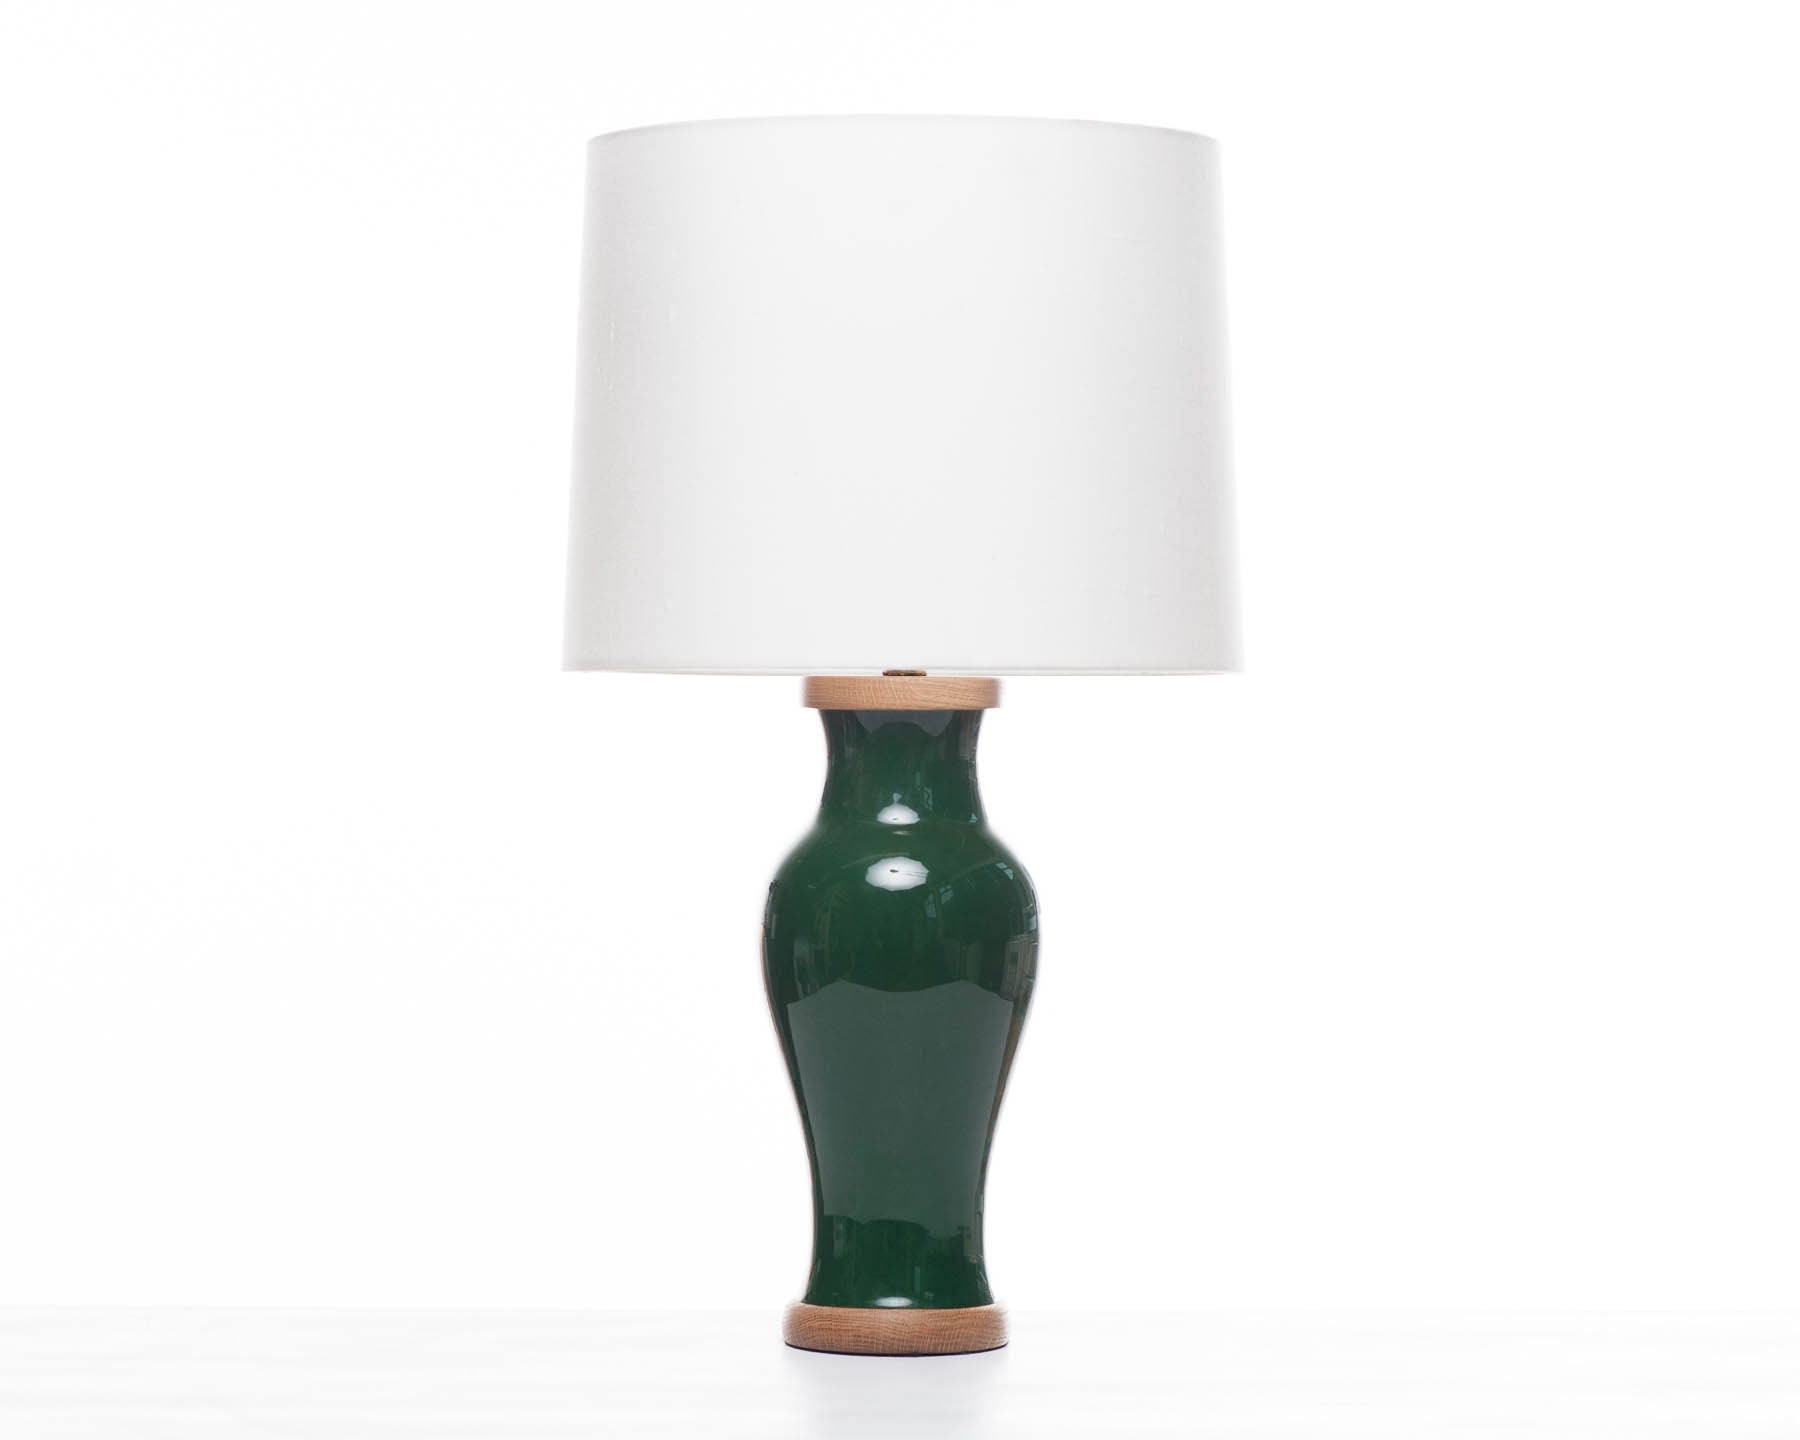 Lawrence & Scott Gabrielle Baluster Porcelain Lamp in Racing Green with Walnut Base